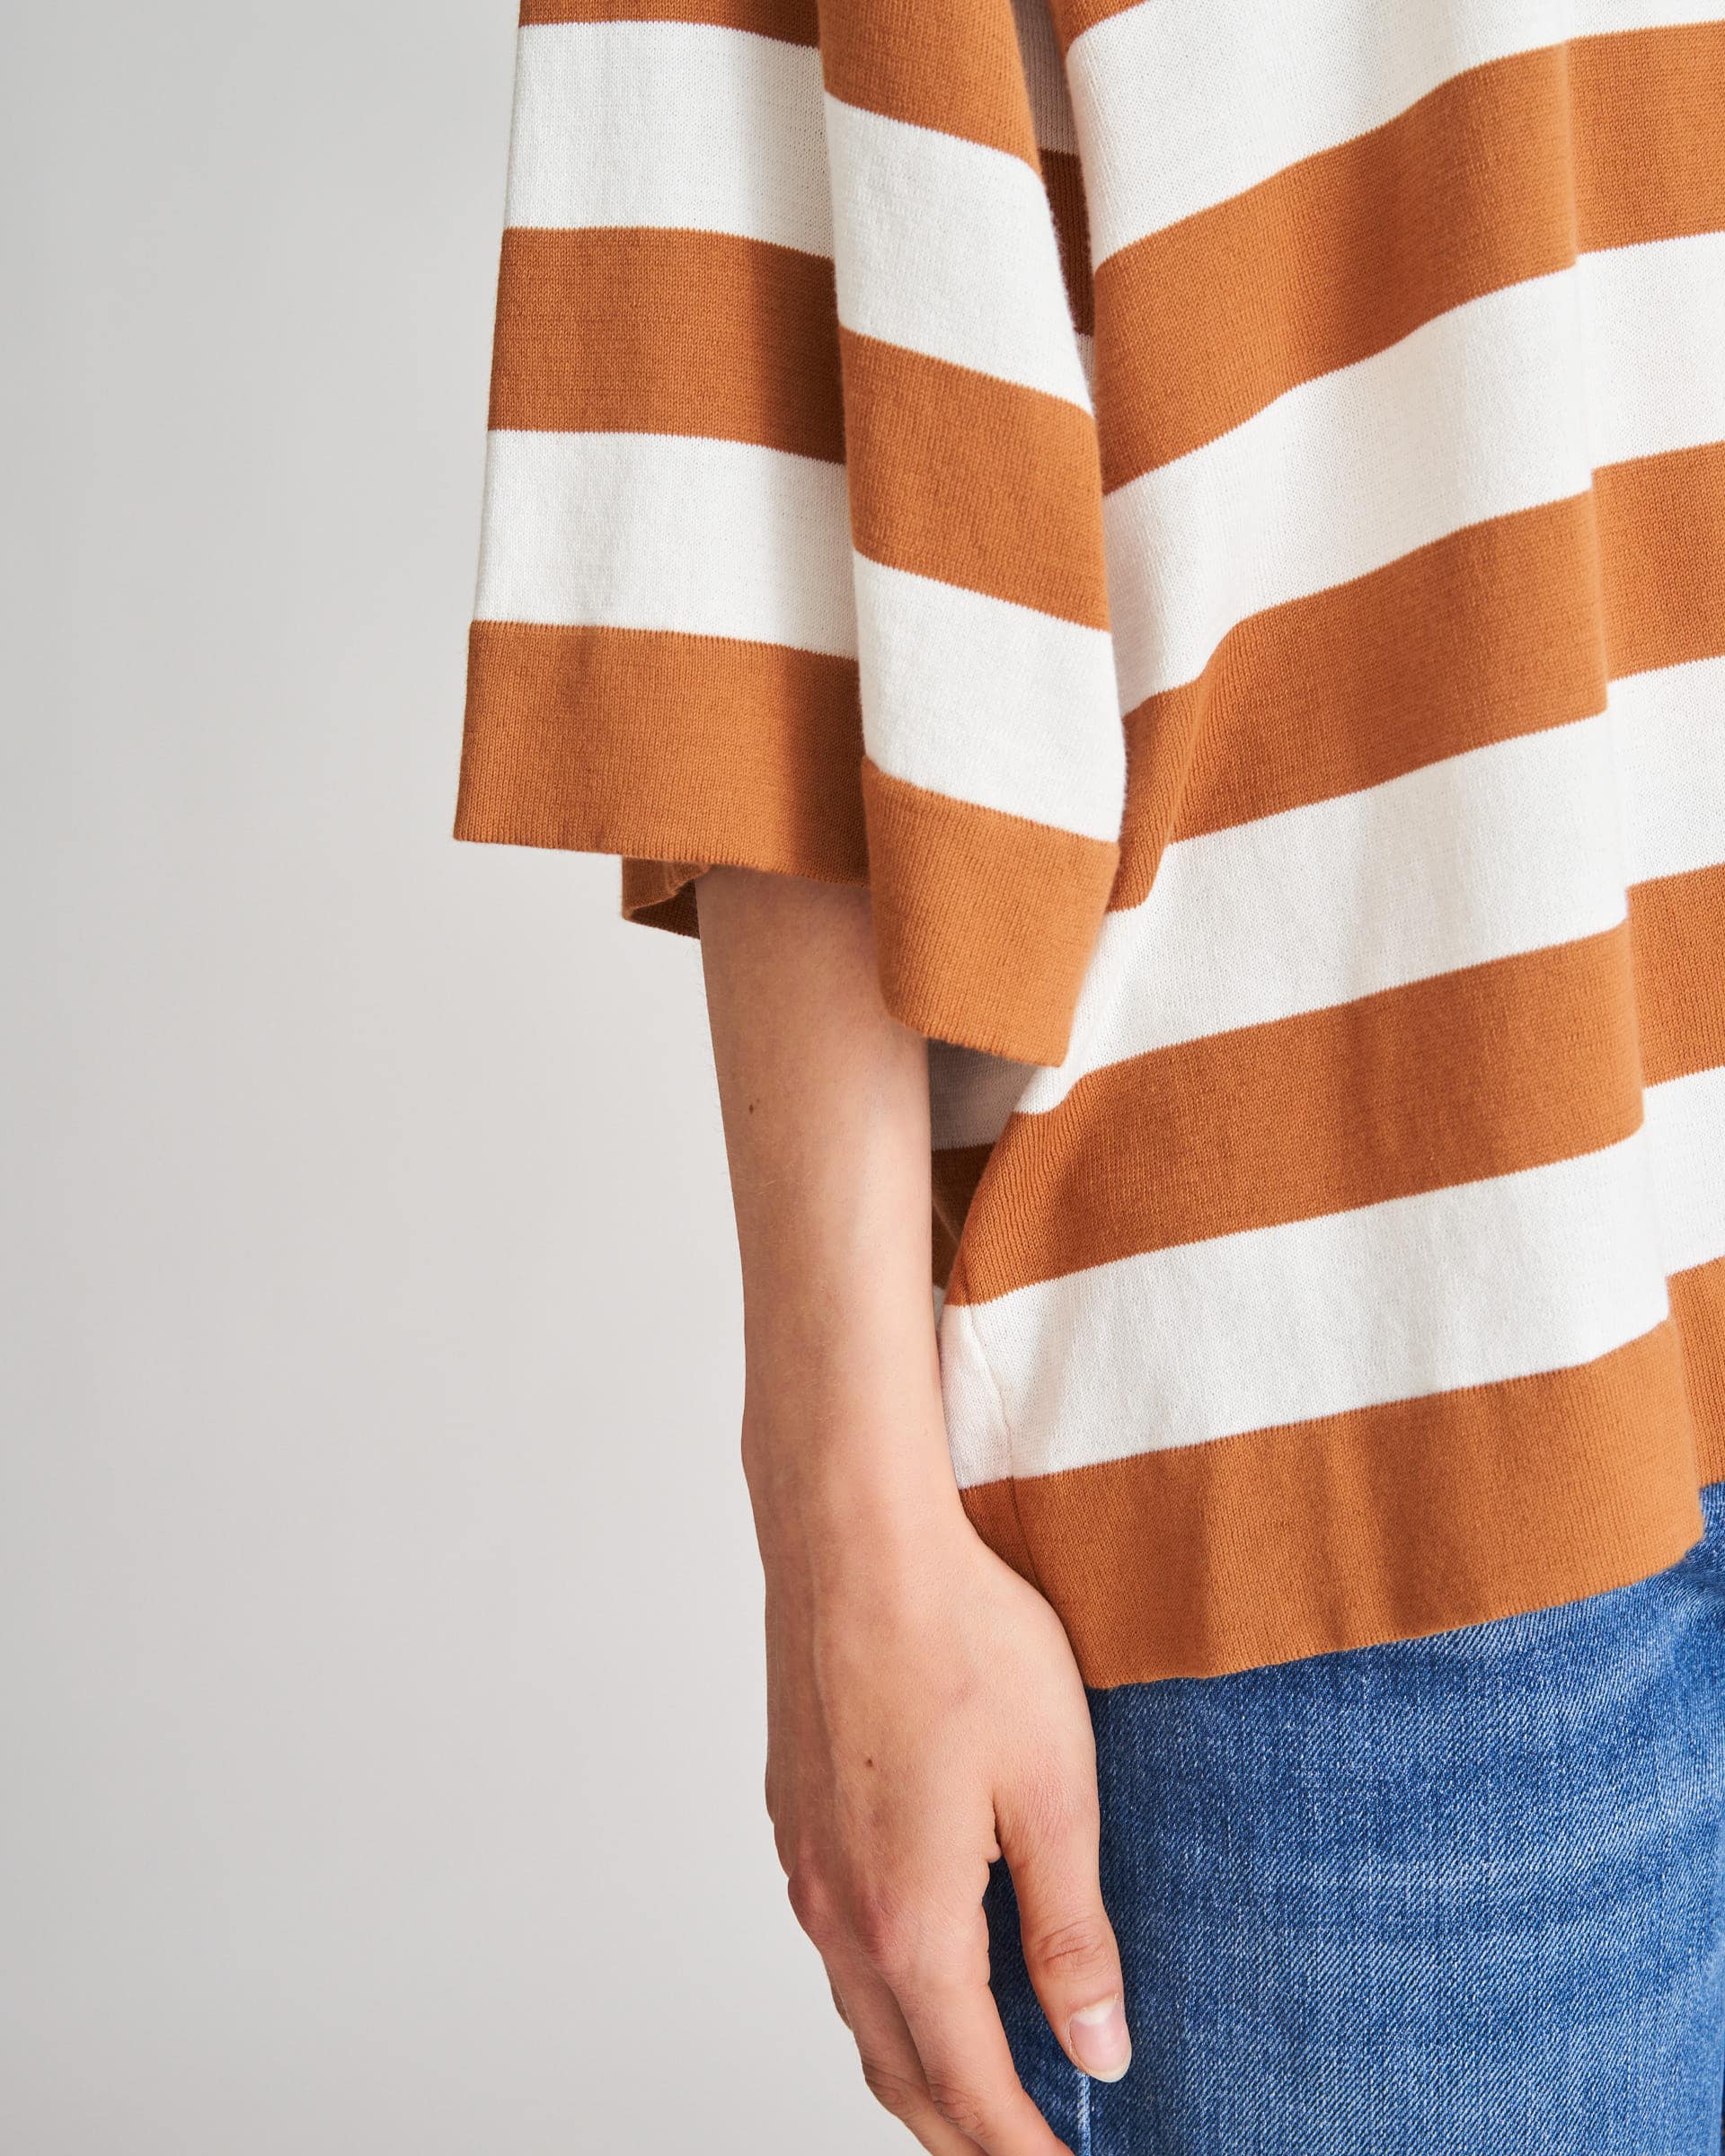 The Market Store | Striped Over Sweater